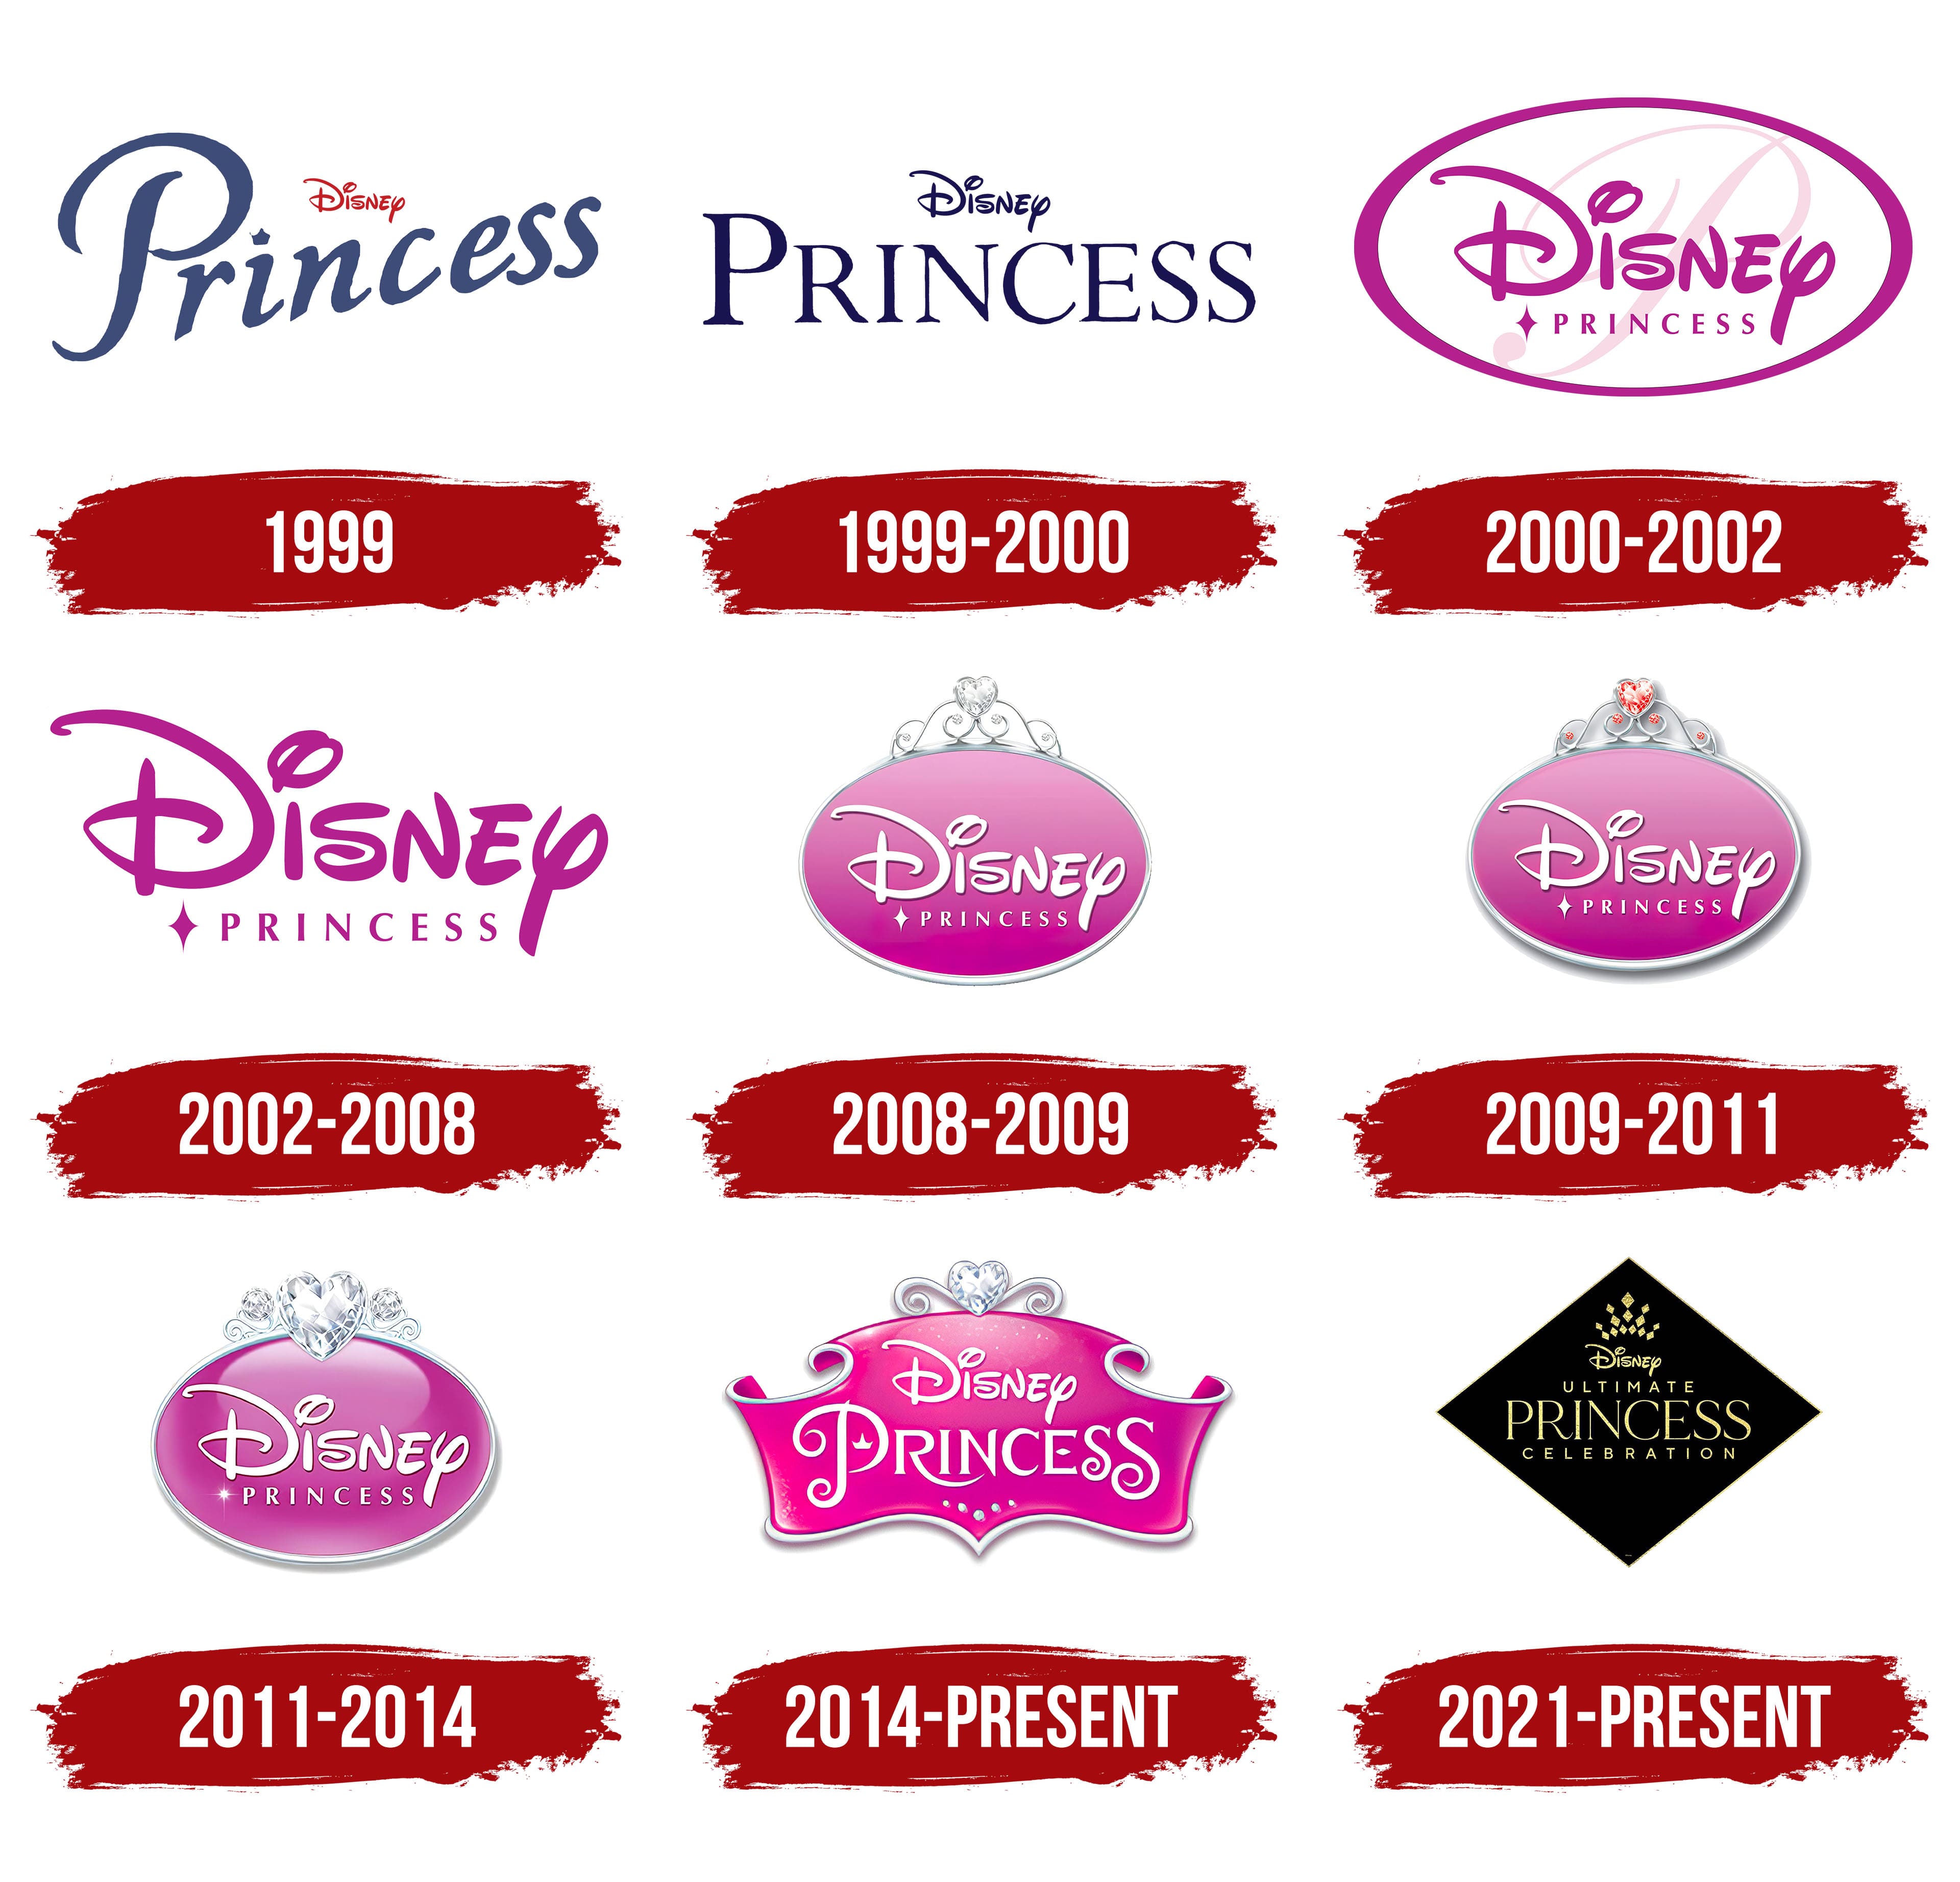 The Official Disney Princess Rules, Explained